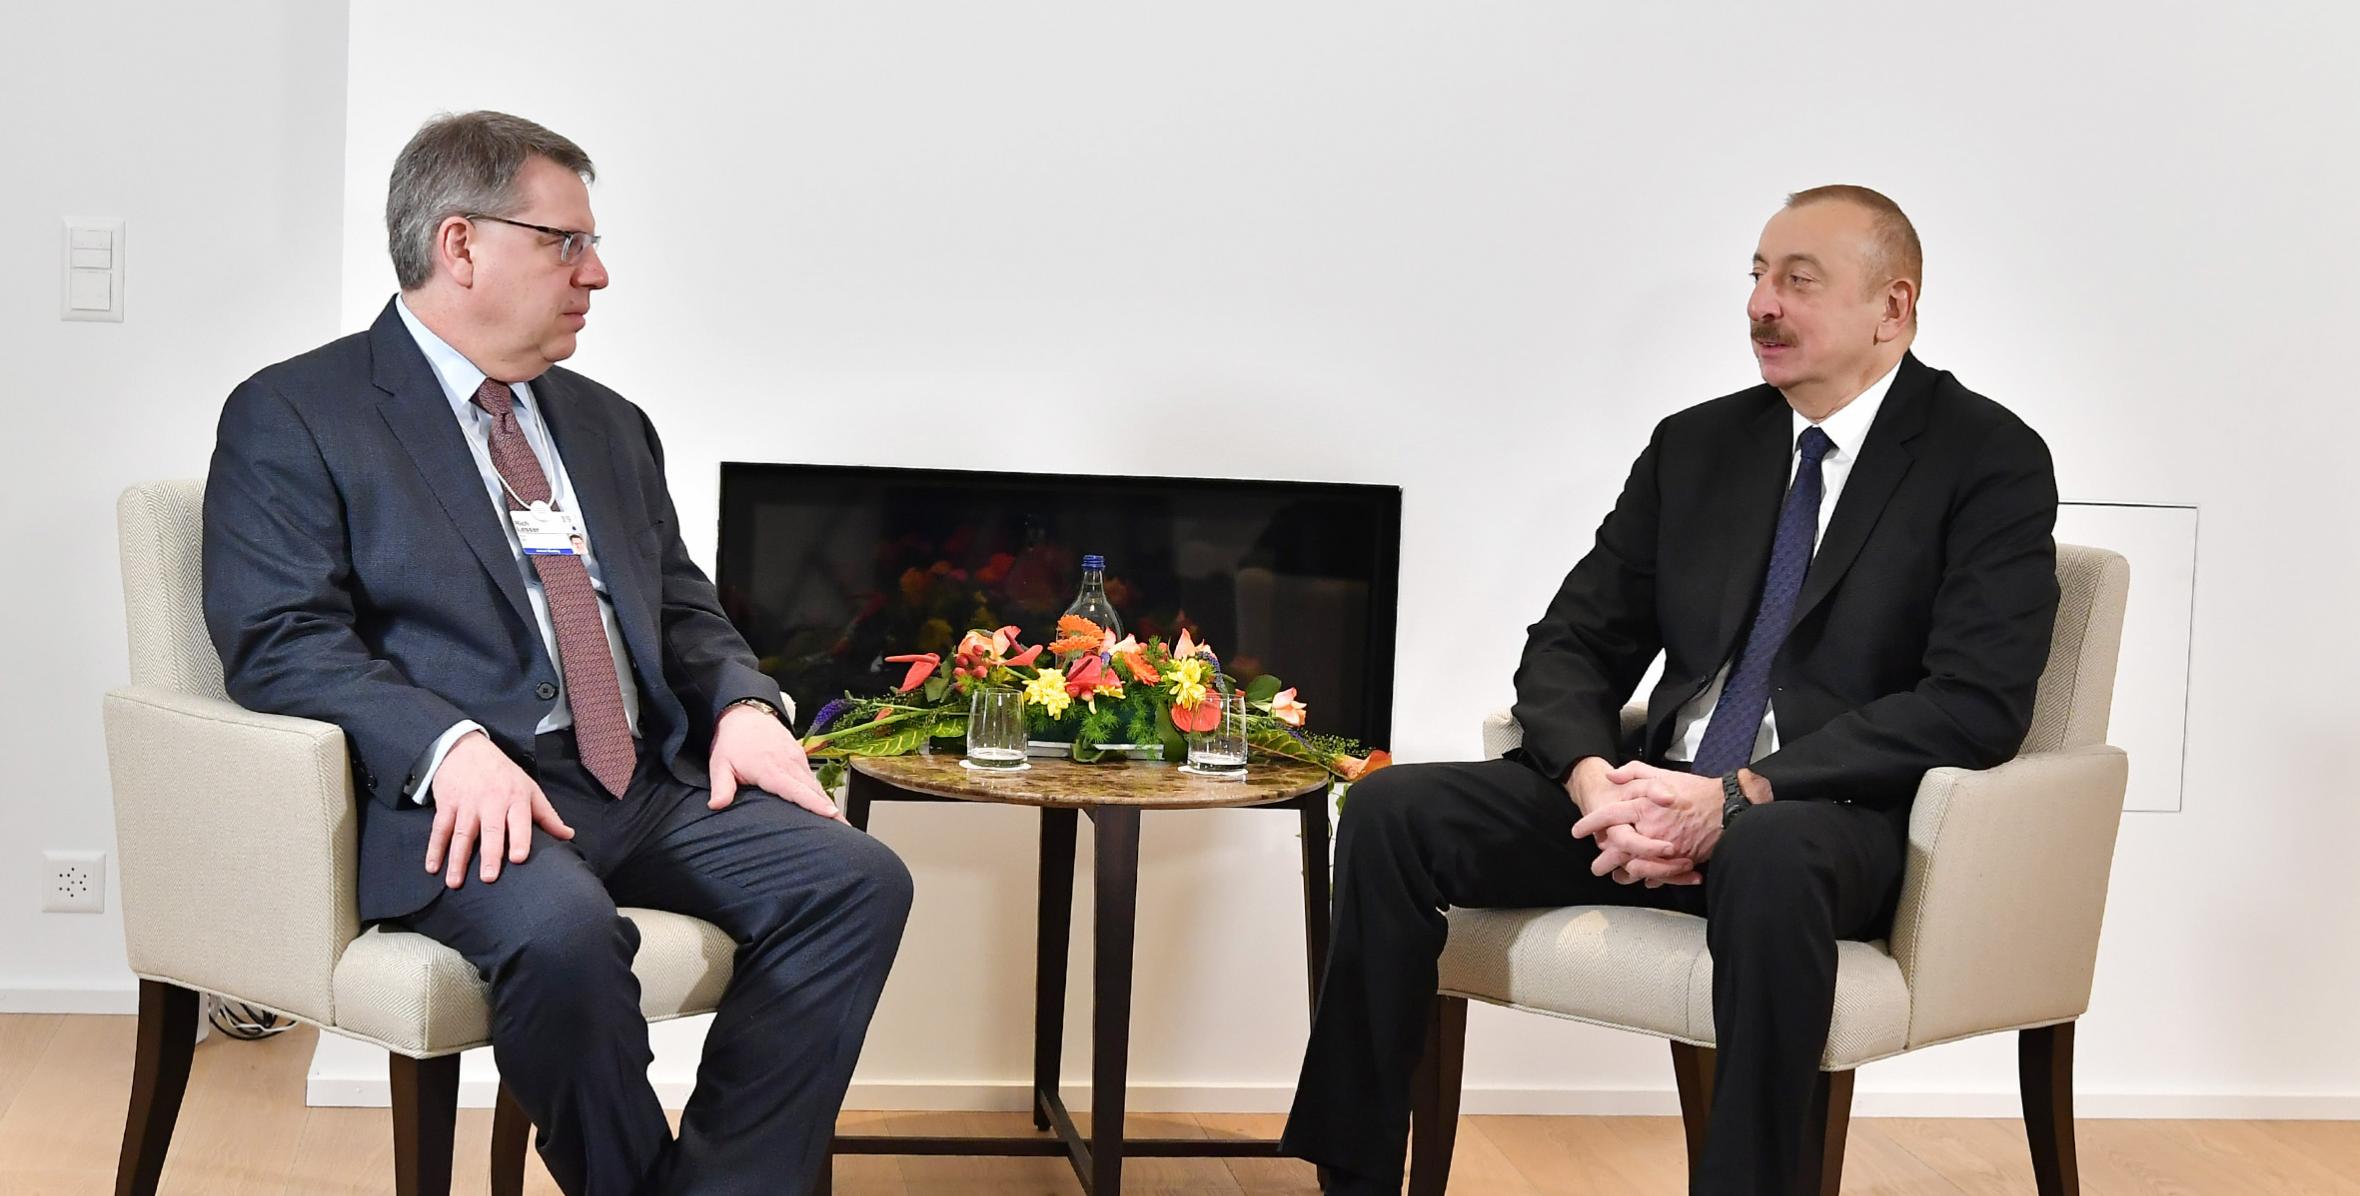 Ilham Aliyev met with The Boston Consulting Group CEO